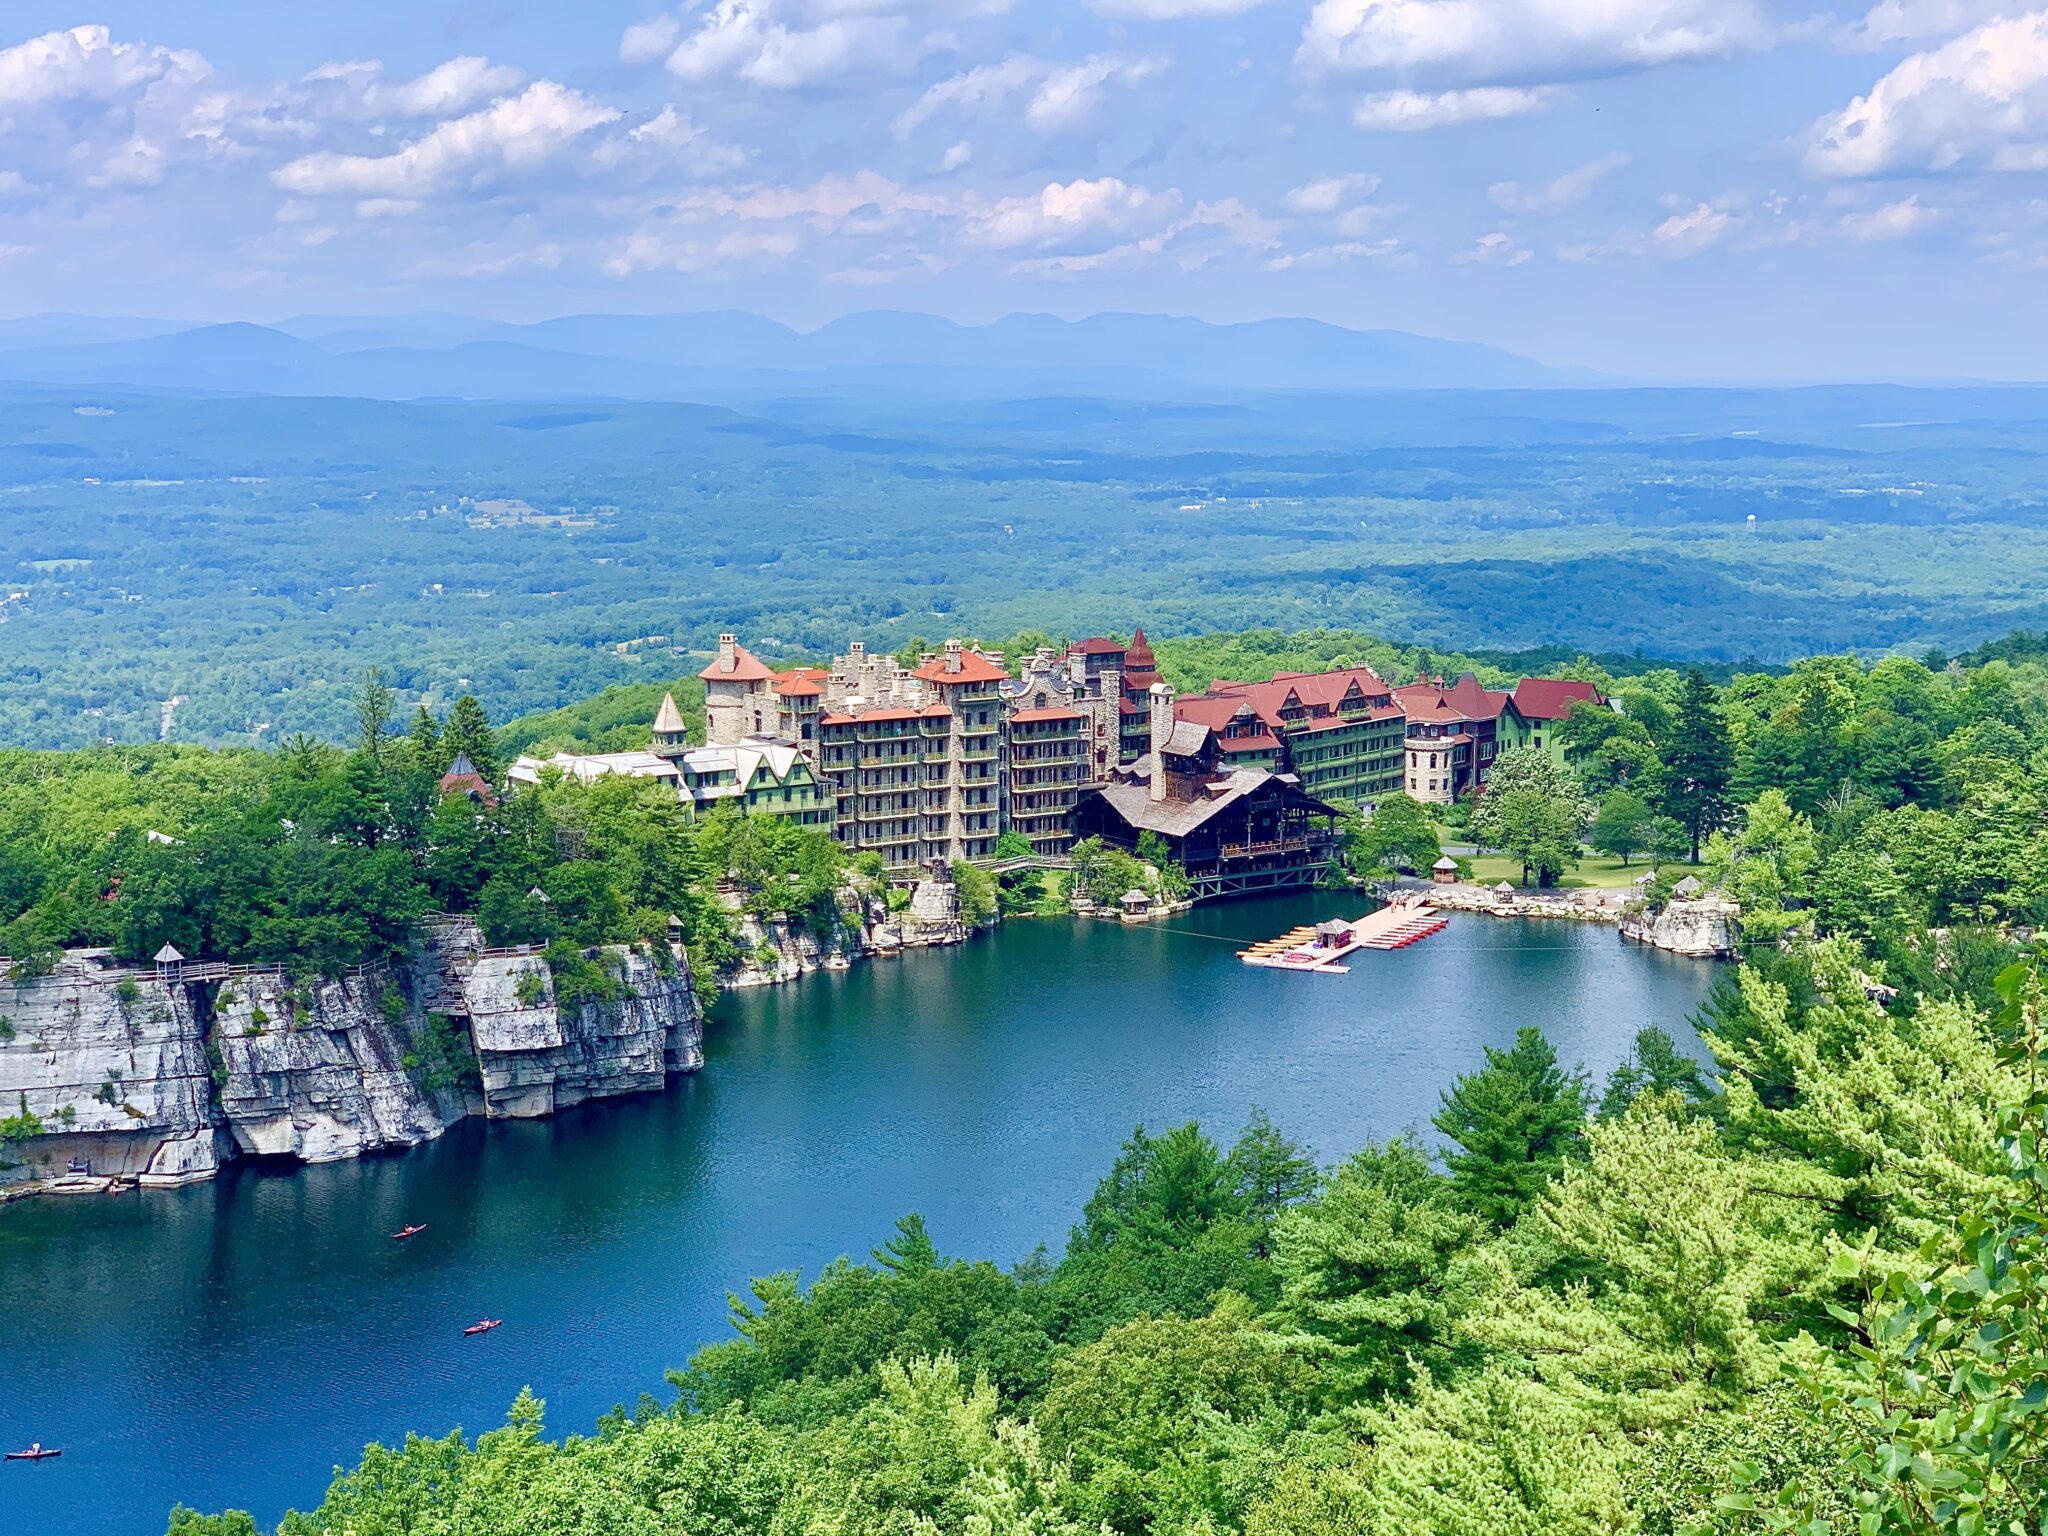 Mohonk Mountain House New Paltz, NY Been There Done That with Kids